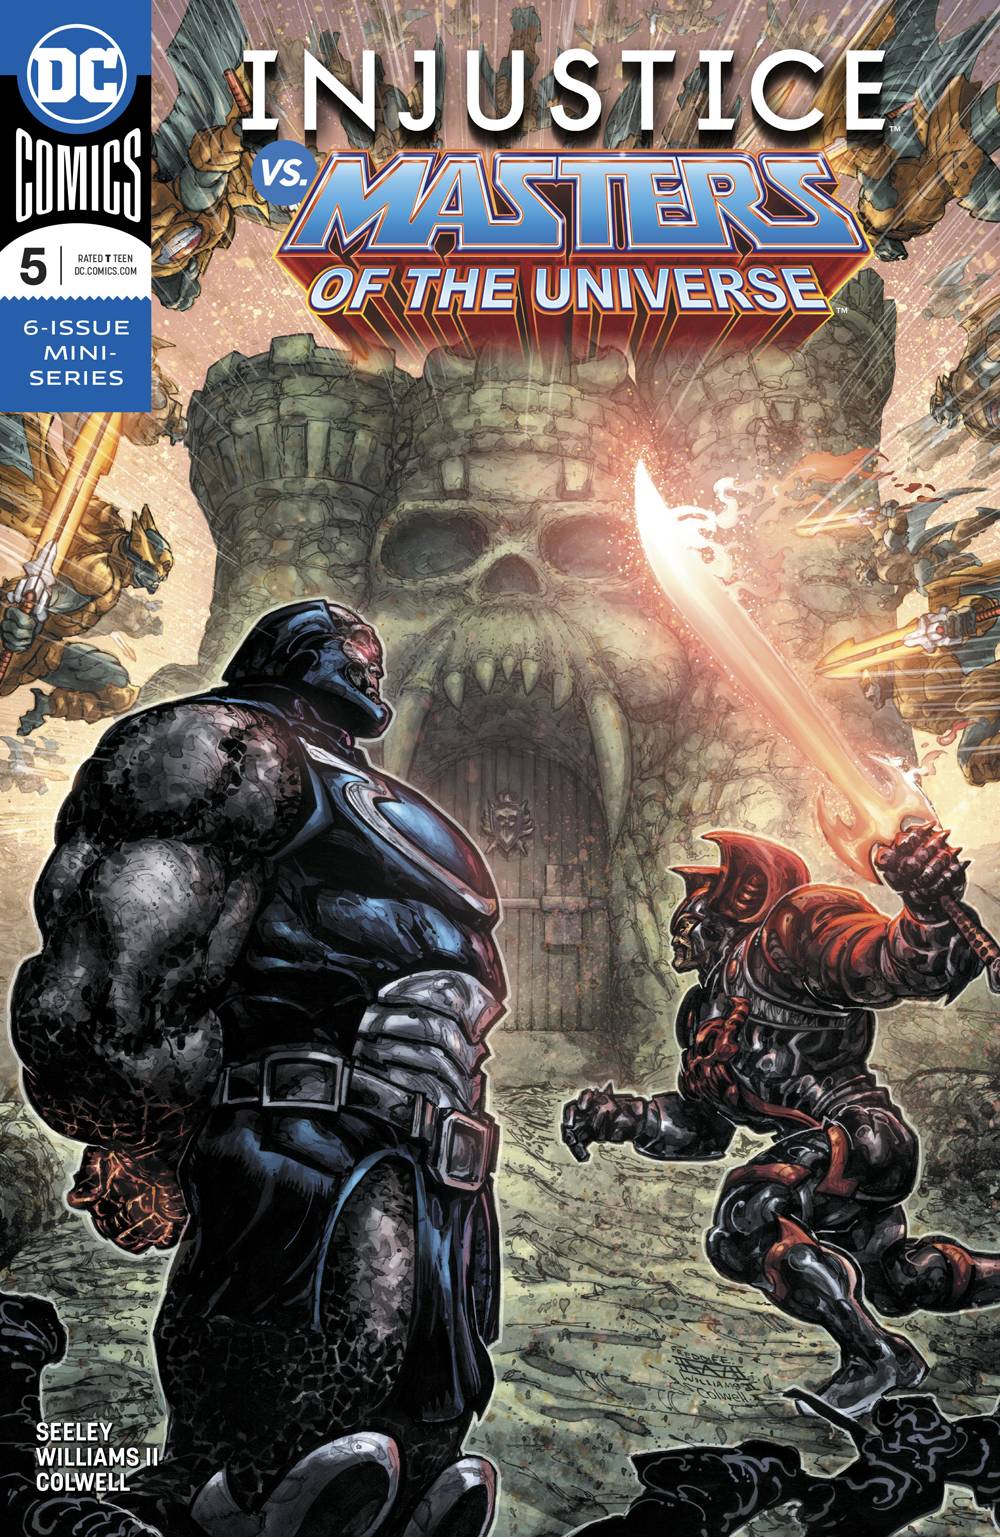 Injustice vs Masters of The Universe #5 (of 6) [2018]